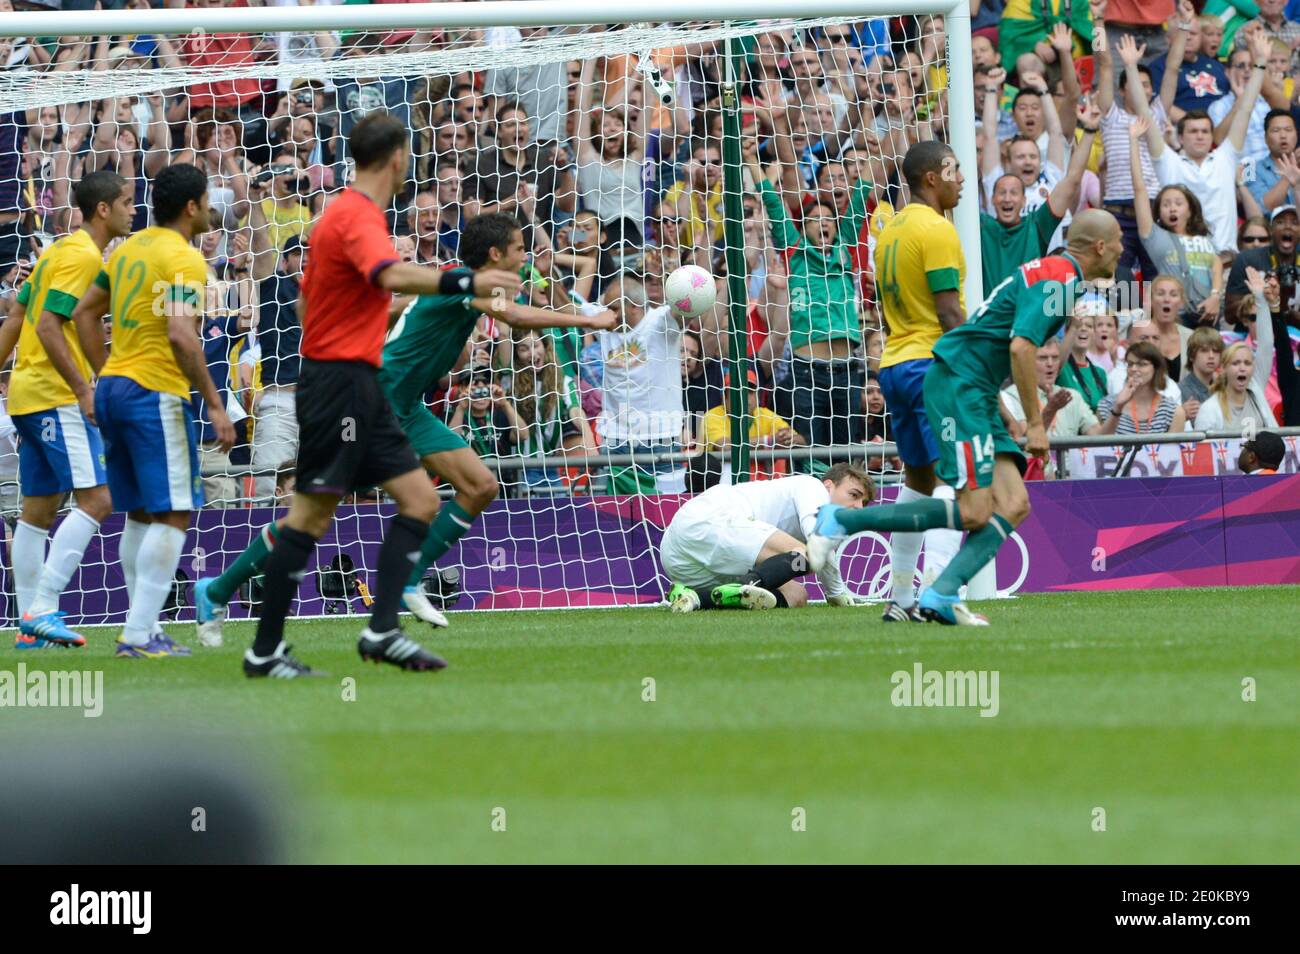 Mexico's Oribe Peralta scoring the 2-0 goal in the football Olympic final Brasil vs Mexico of the 2012 London Olympics Games in Wembley Stadium, London, UK on August 11h, 2012.Mexico won 2-1. Photo by Henri Szwarc/ABACAPRESS.COM Stock Photo